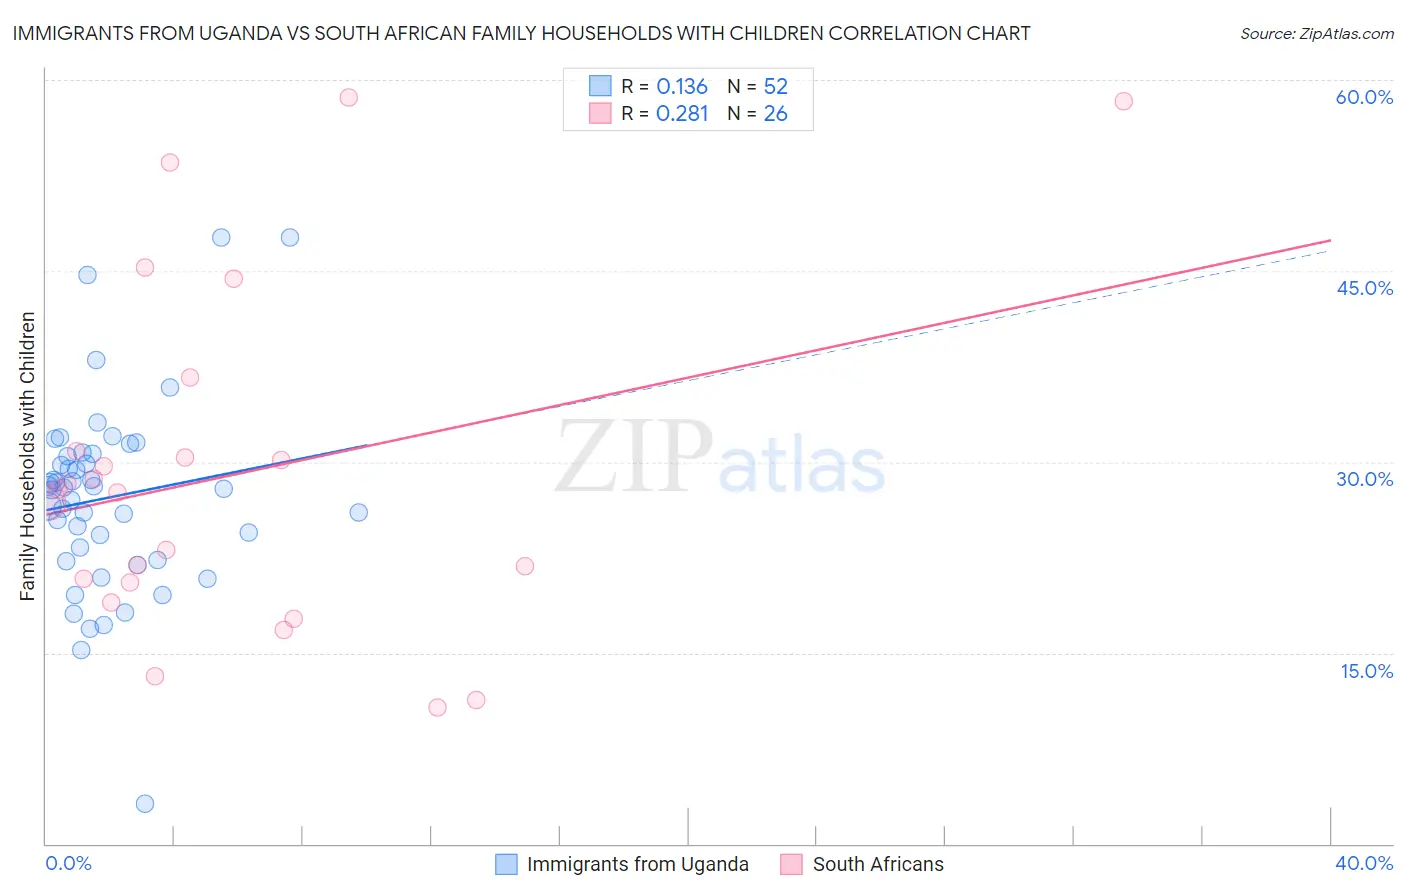 Immigrants from Uganda vs South African Family Households with Children